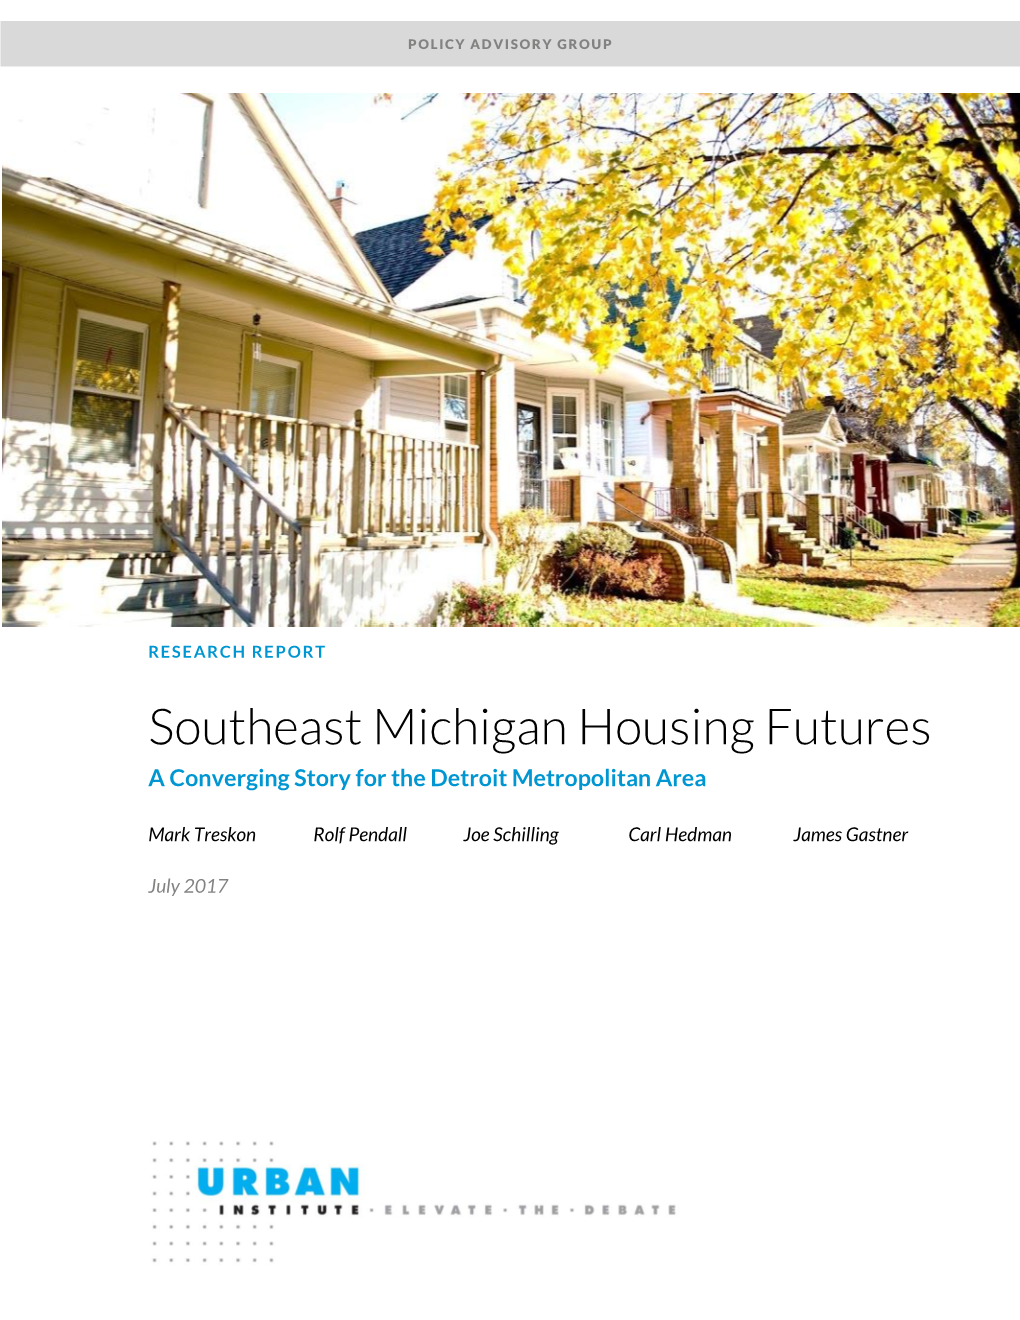 Southeast Michigan Housing Futures a Converging Story for the Detroit Metropolitan Area